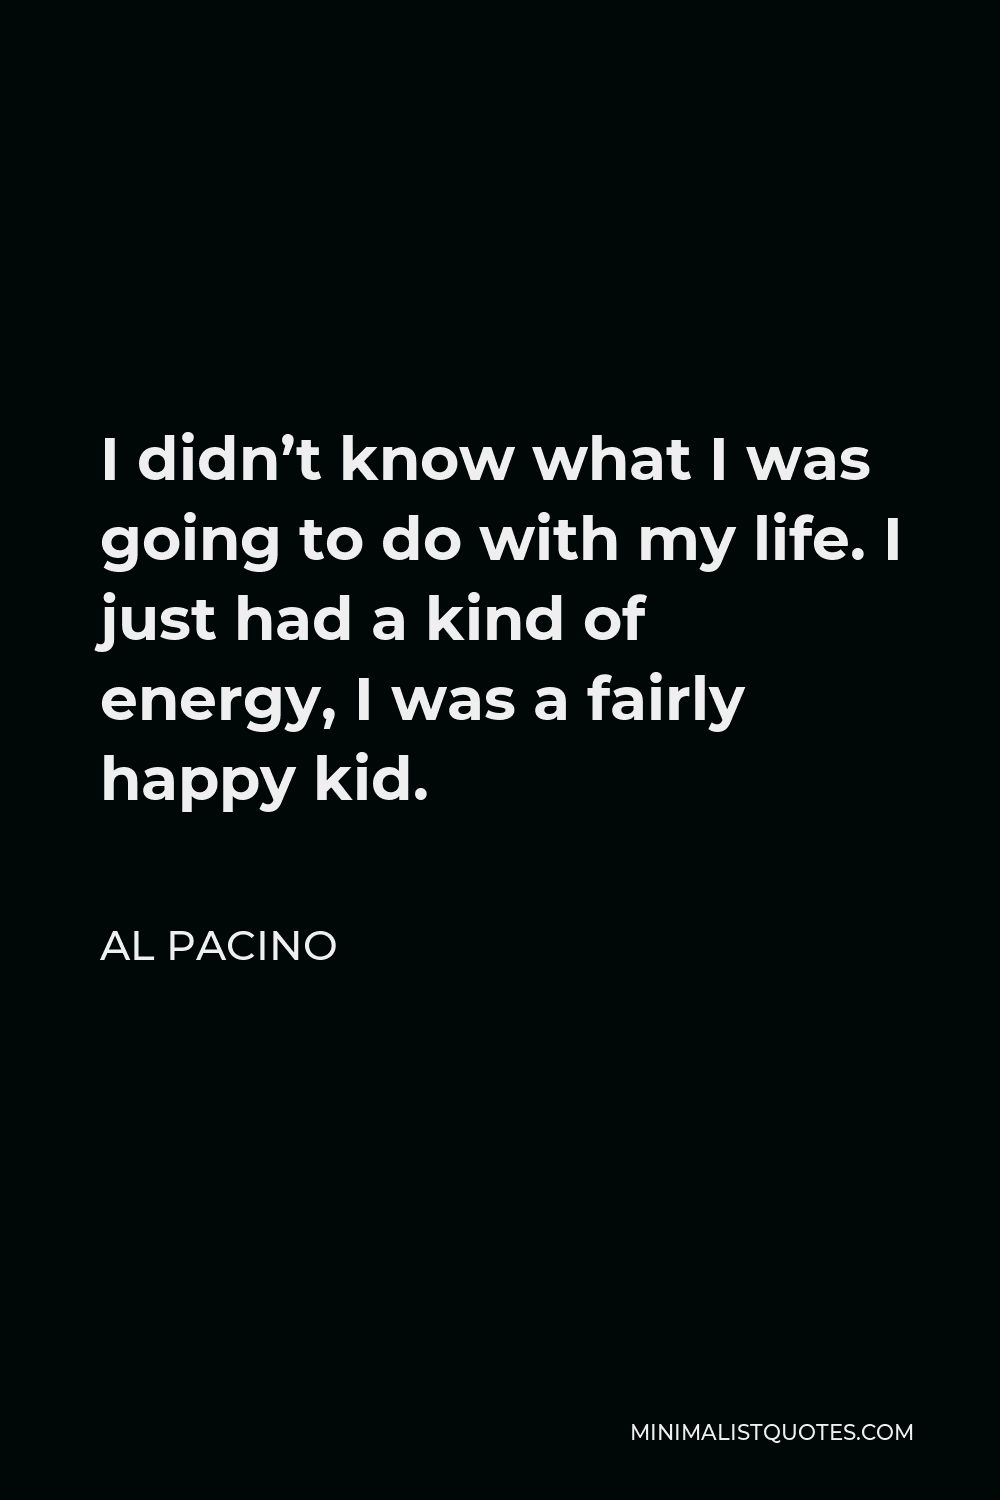 Al Pacino Quote - I didn’t know what I was going to do with my life. I just had a kind of energy, I was a fairly happy kid.